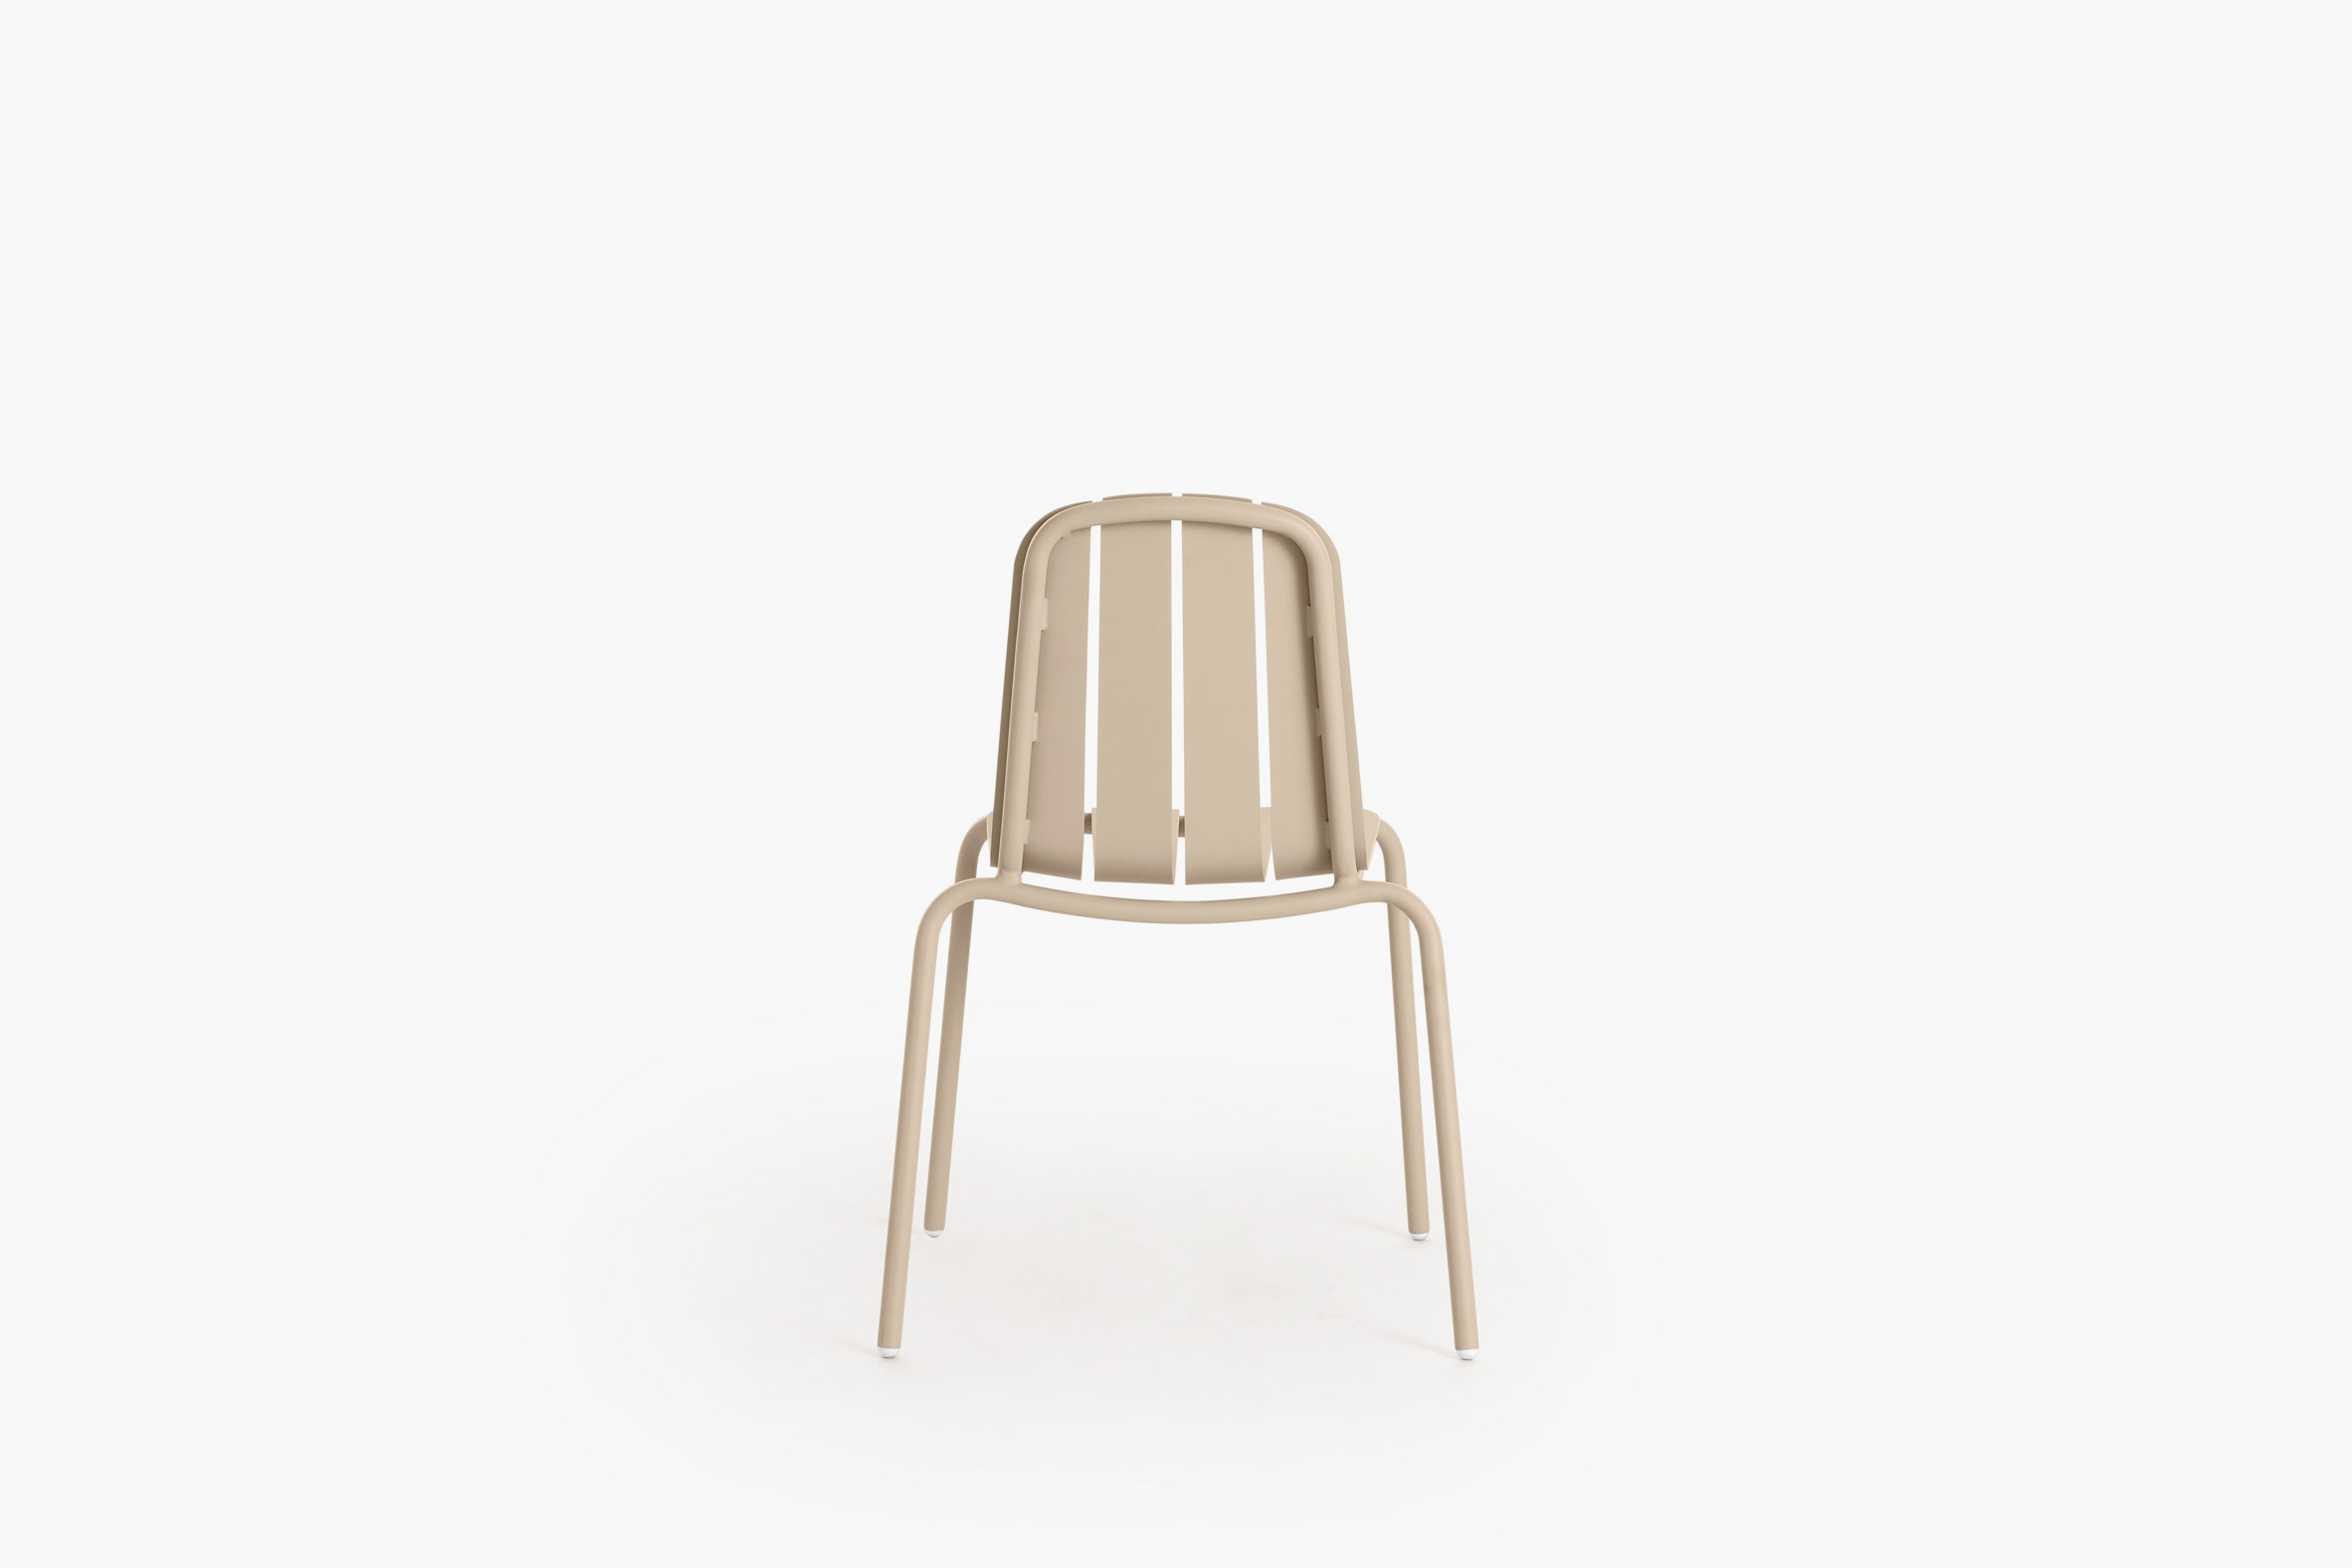 Beige chair on white backdrop